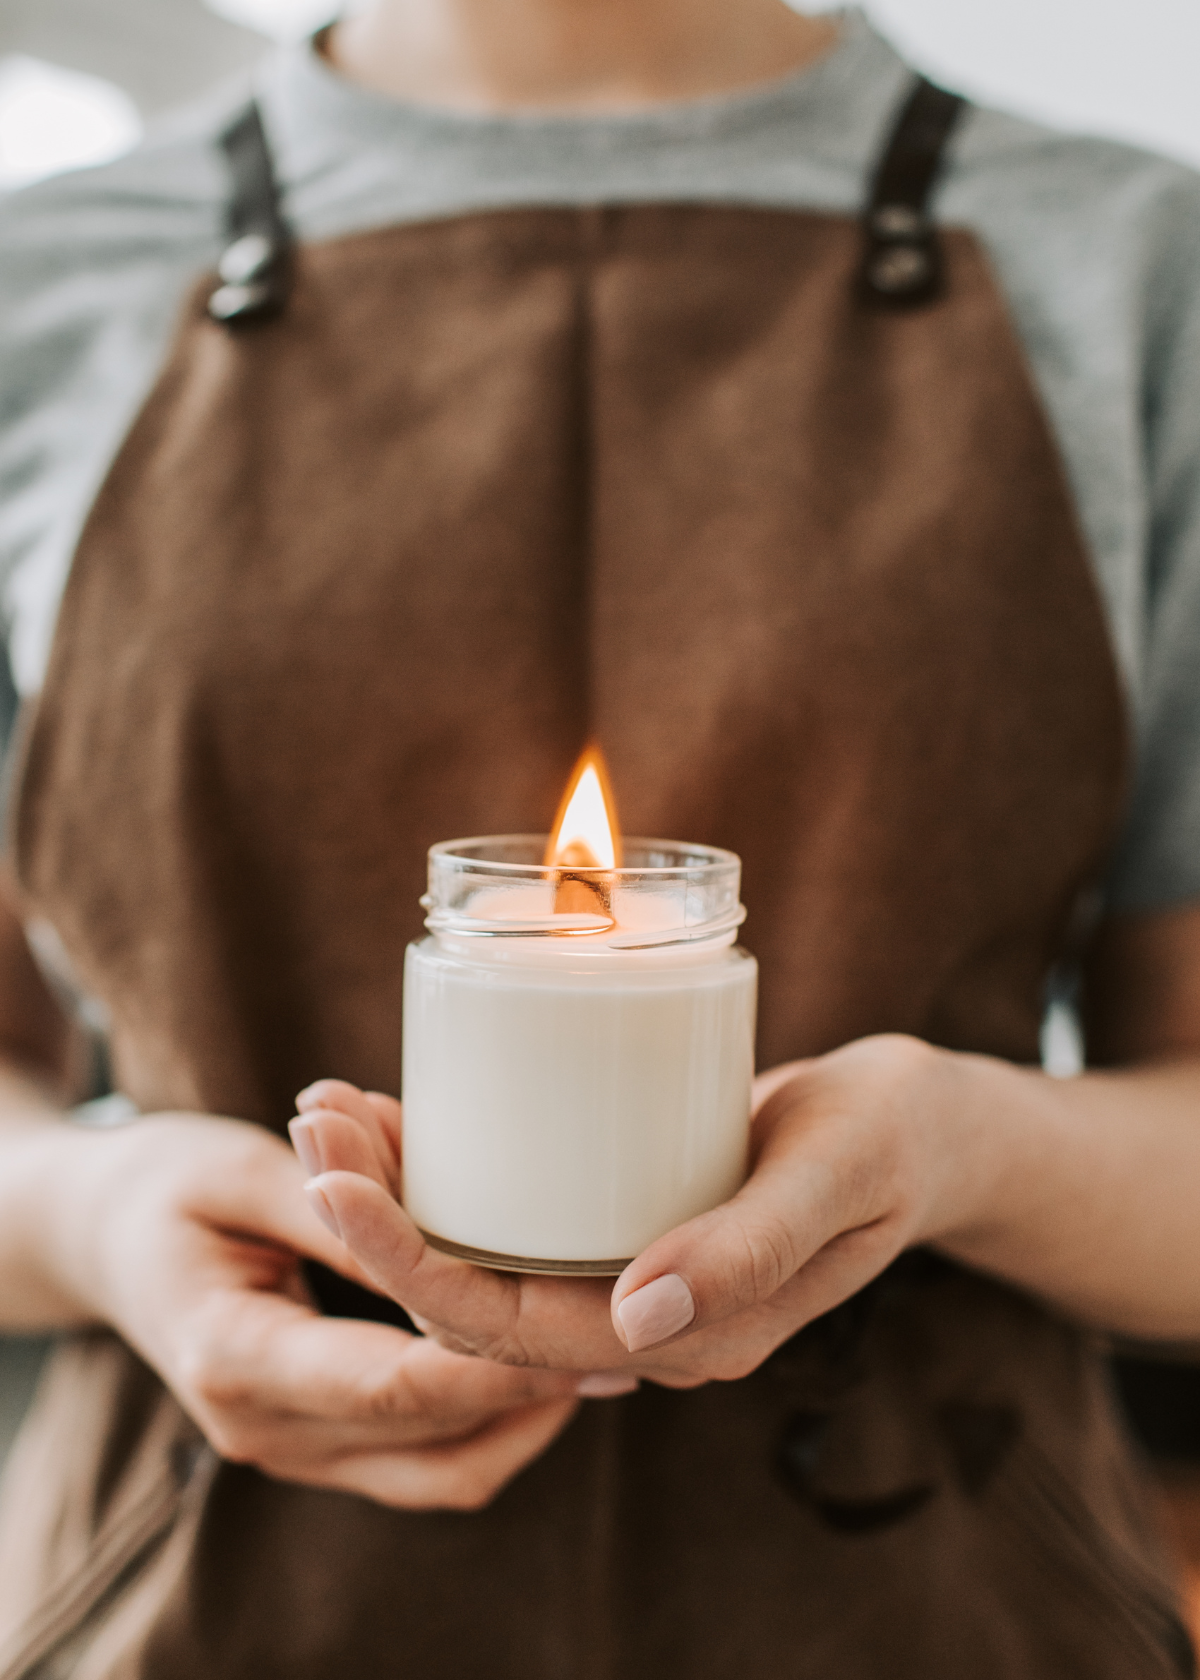 Breathe in Bliss: Top 3 Rosemary Candles for Ultimate Relaxation